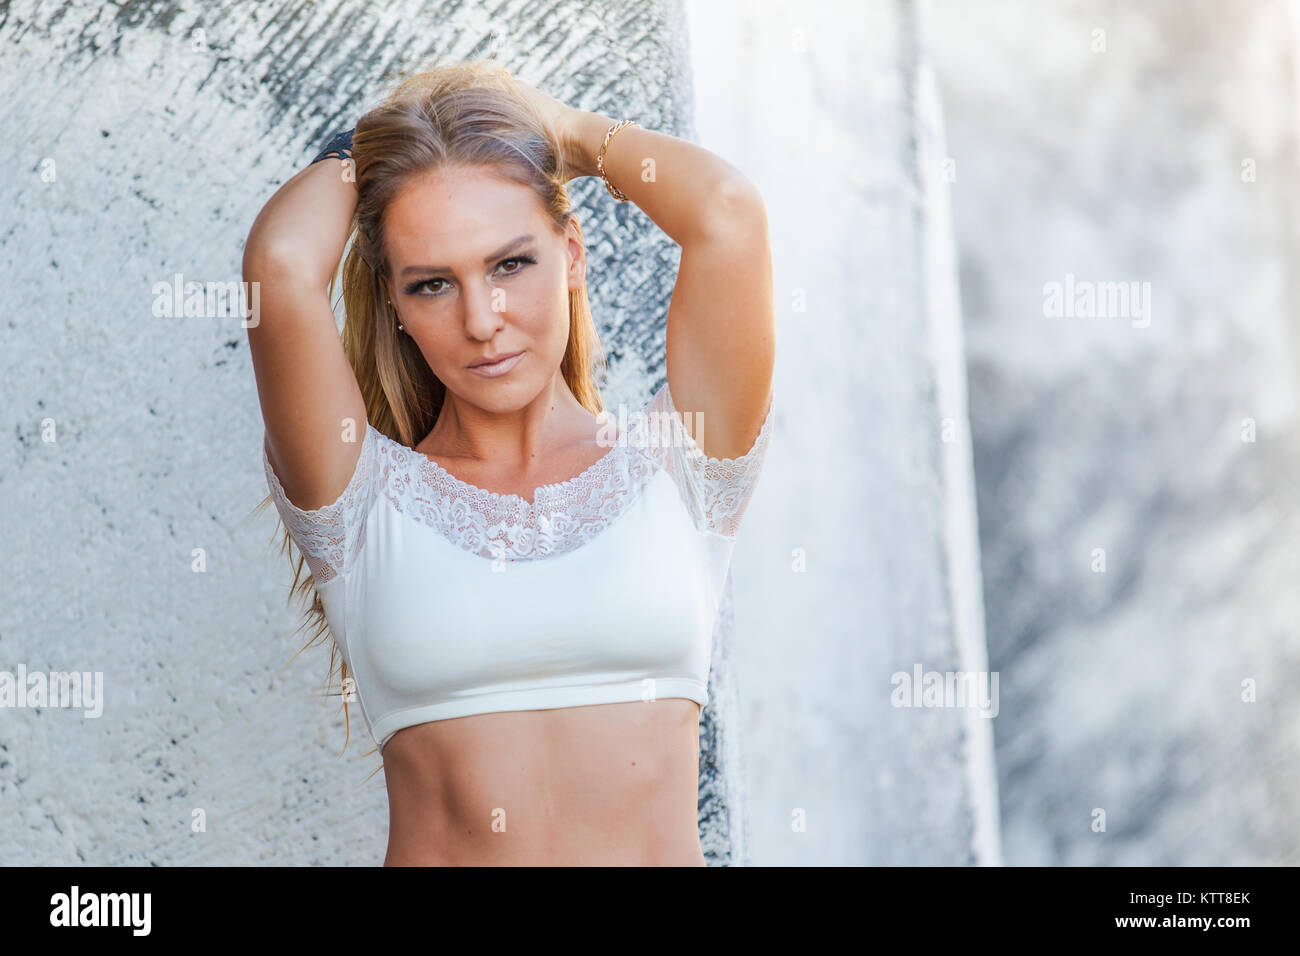 City girl fitness model playing with her hair, emotional Stock Photo